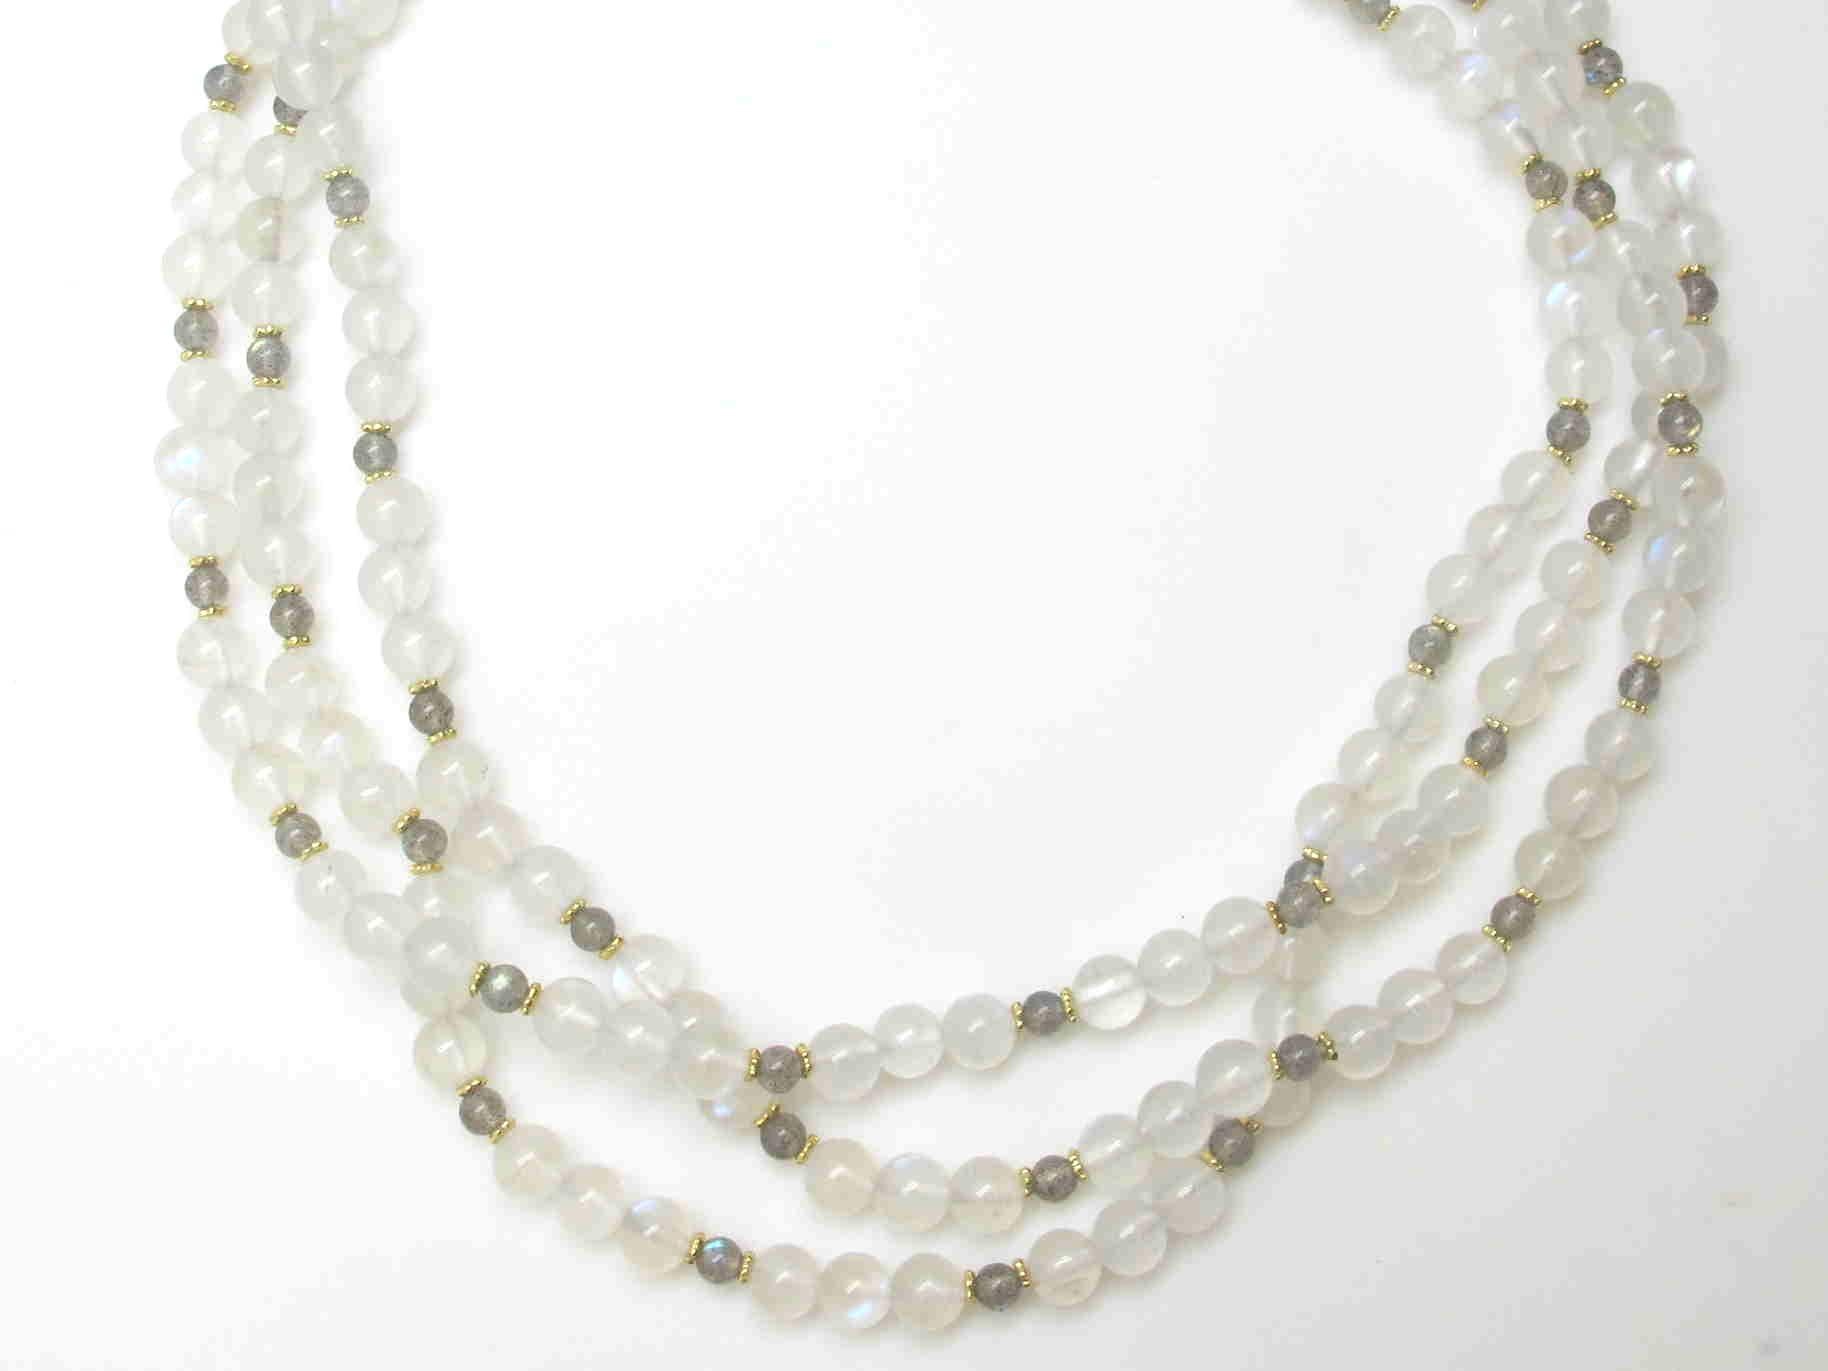 Artisan 3-Strand Moonstone and Labradorite Beaded Necklace with 18k Yellow Gold Accents For Sale